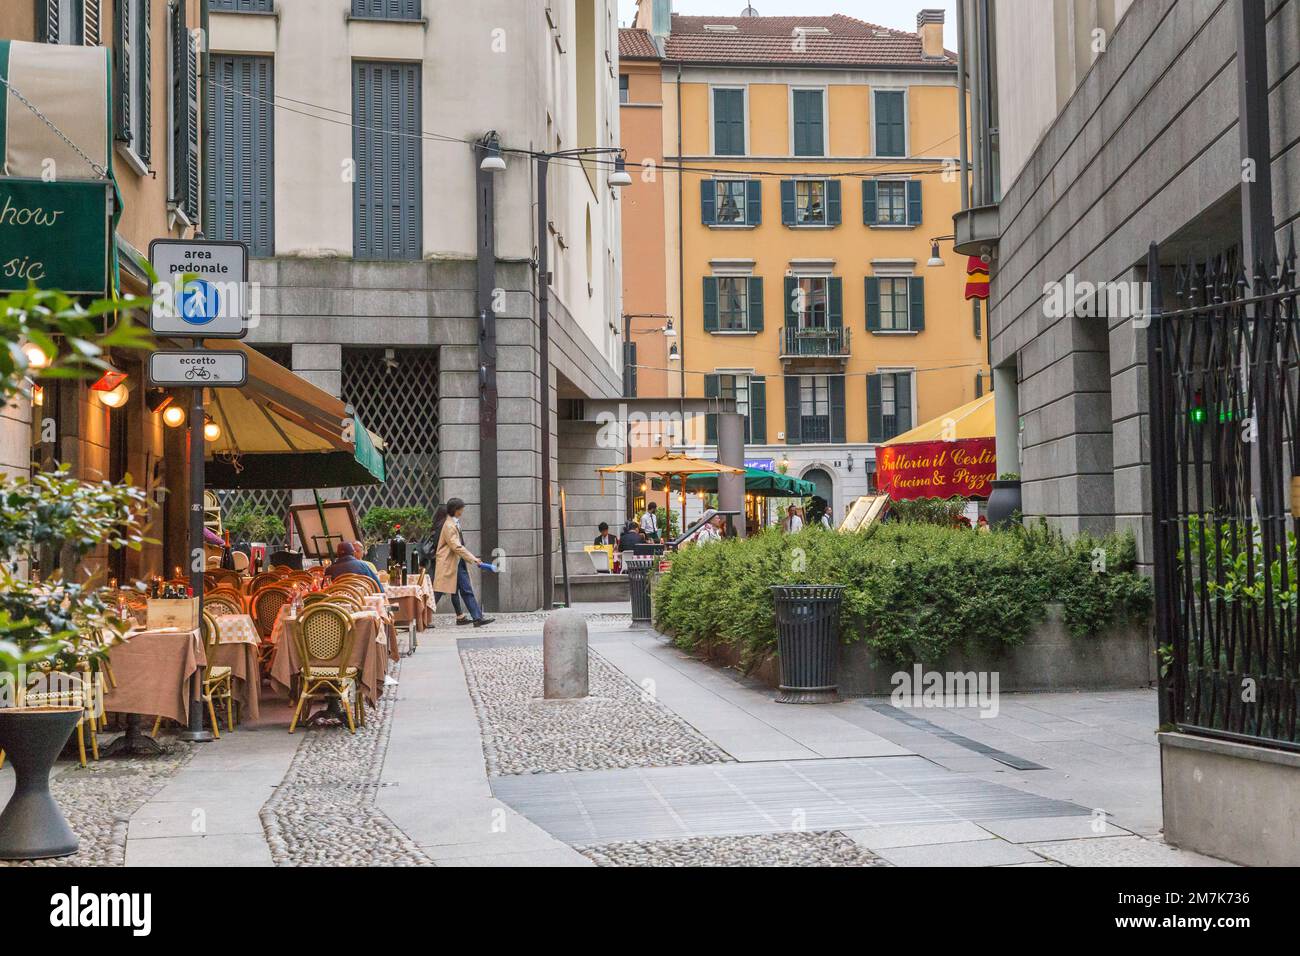 MILAN, ITALY - MAY 15, 2018: This is one of the pedestrian streets in the Brera district, which is one of the most popular areas of the city for relax. Stock Photo